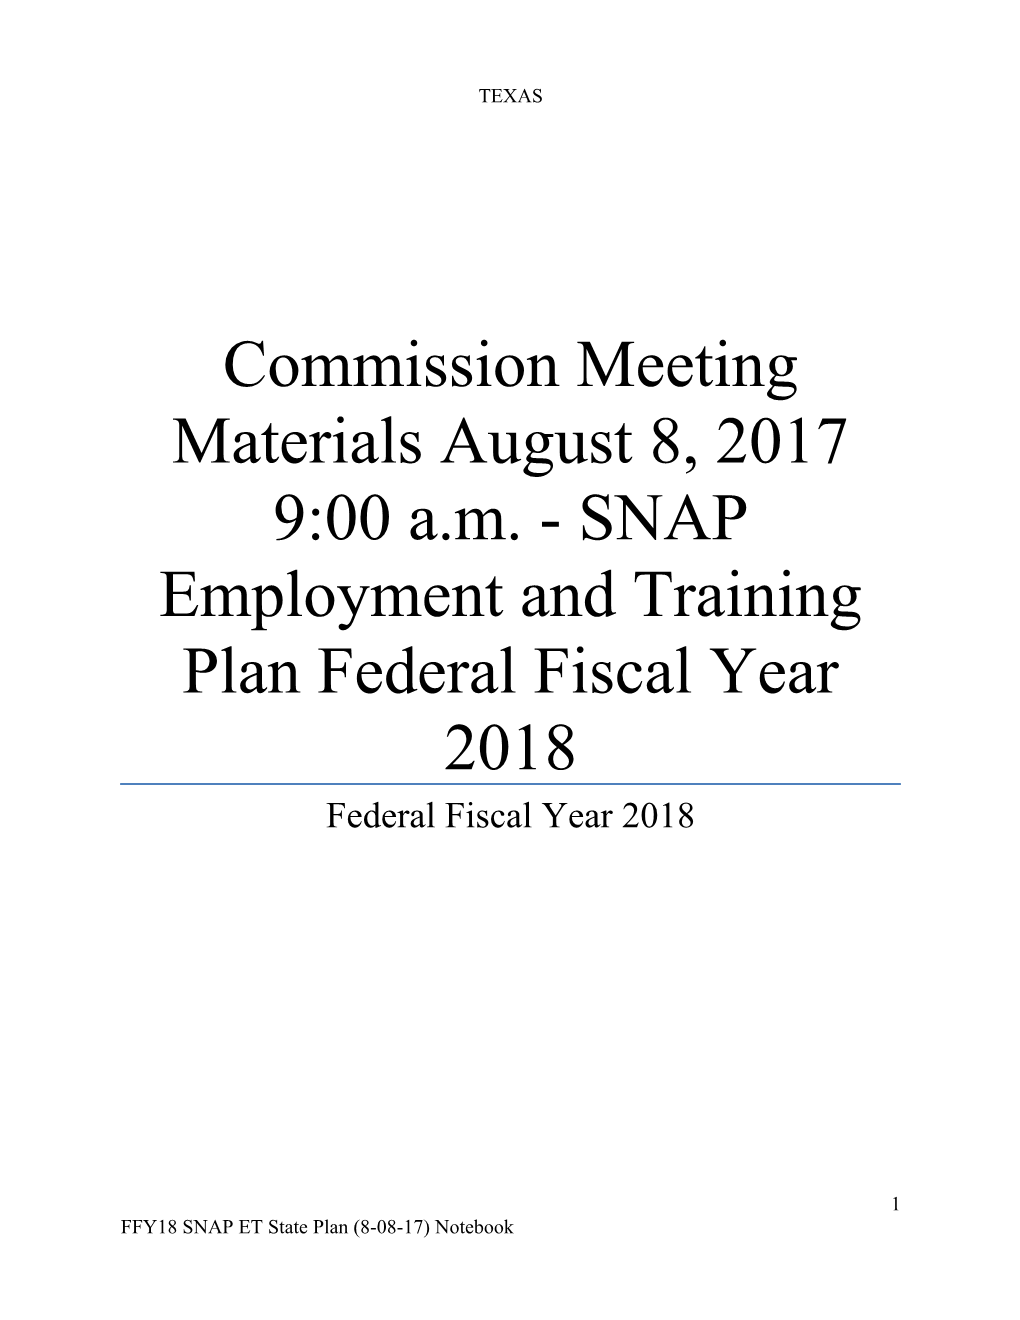 Commission Meeting Materials August 8, 2017 9:00 A.M. - SNAP Employment and Training Plan